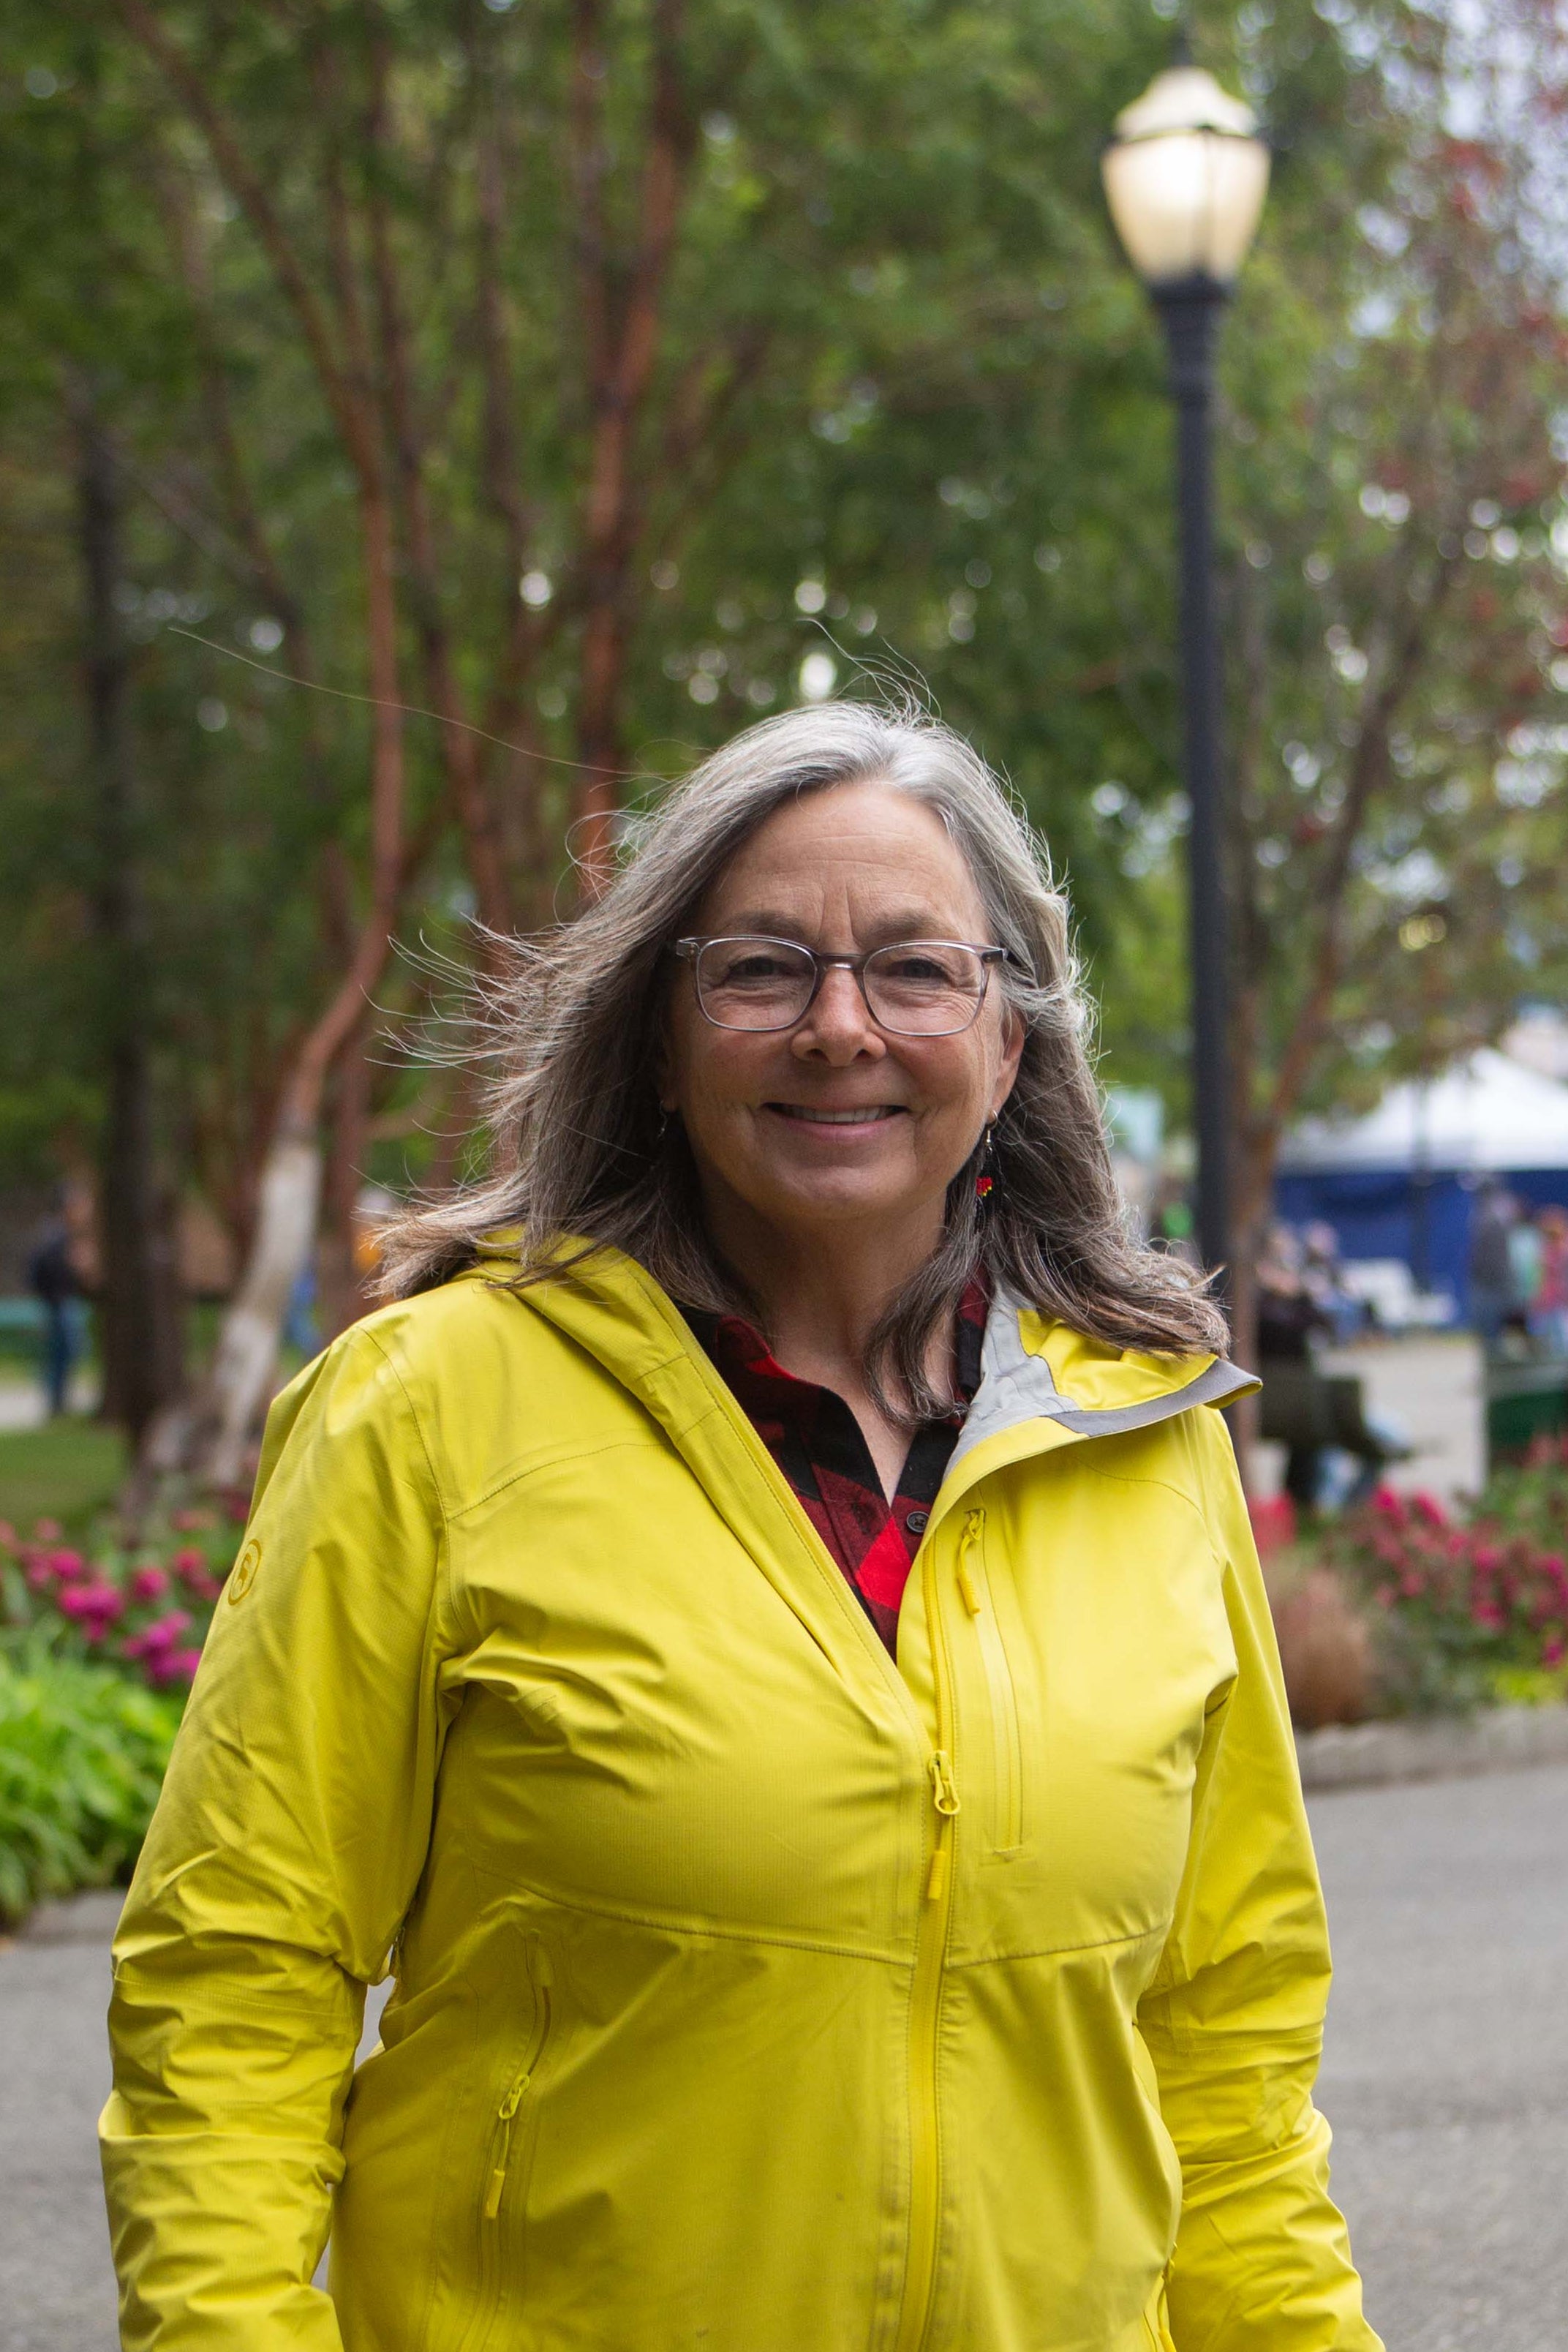 A portrait of a woman outside in a yellow raincoat.